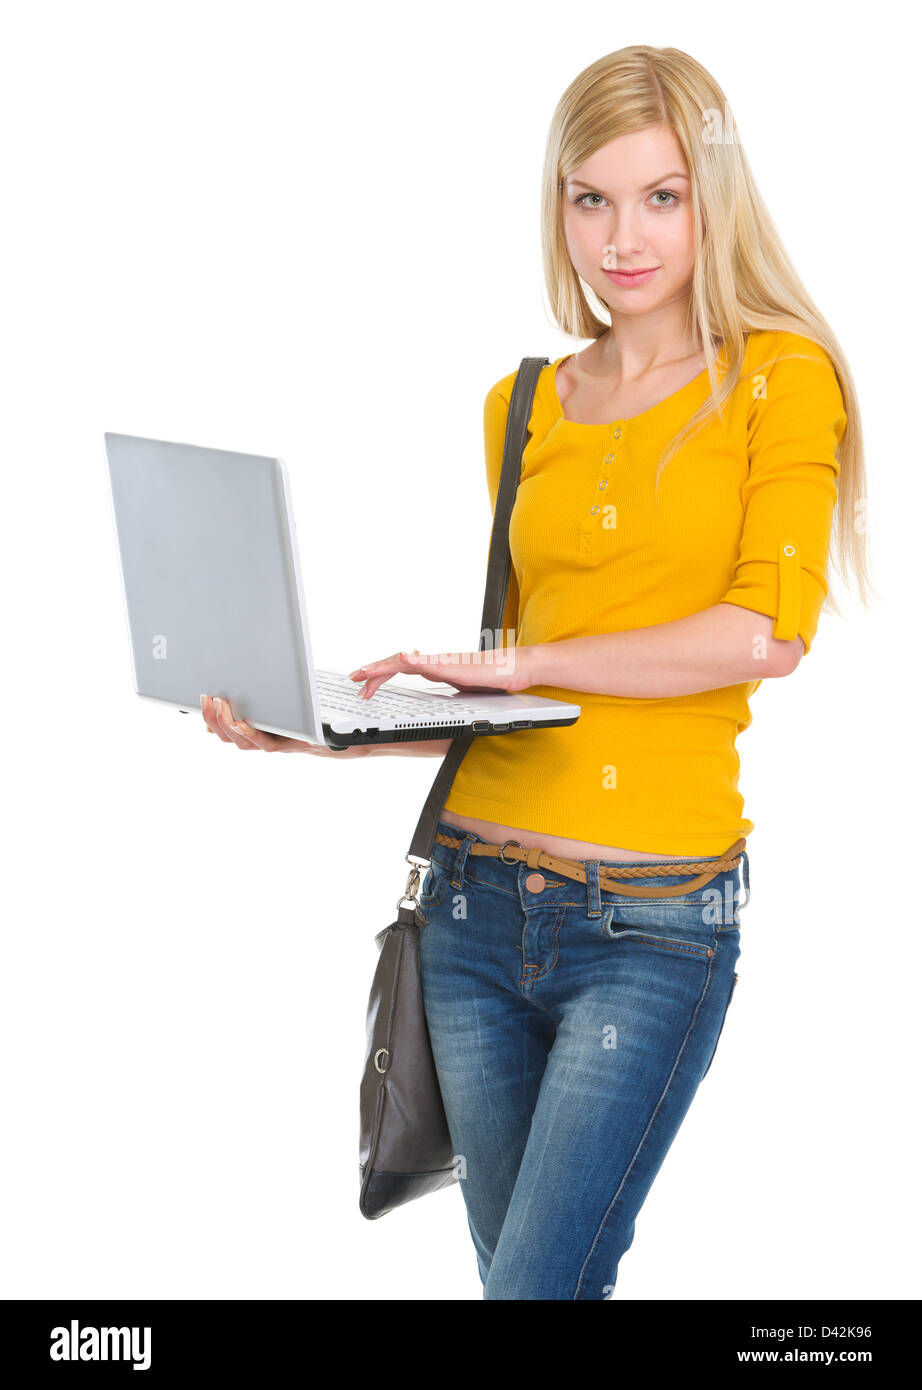 Student girl with laptop Stock Photo